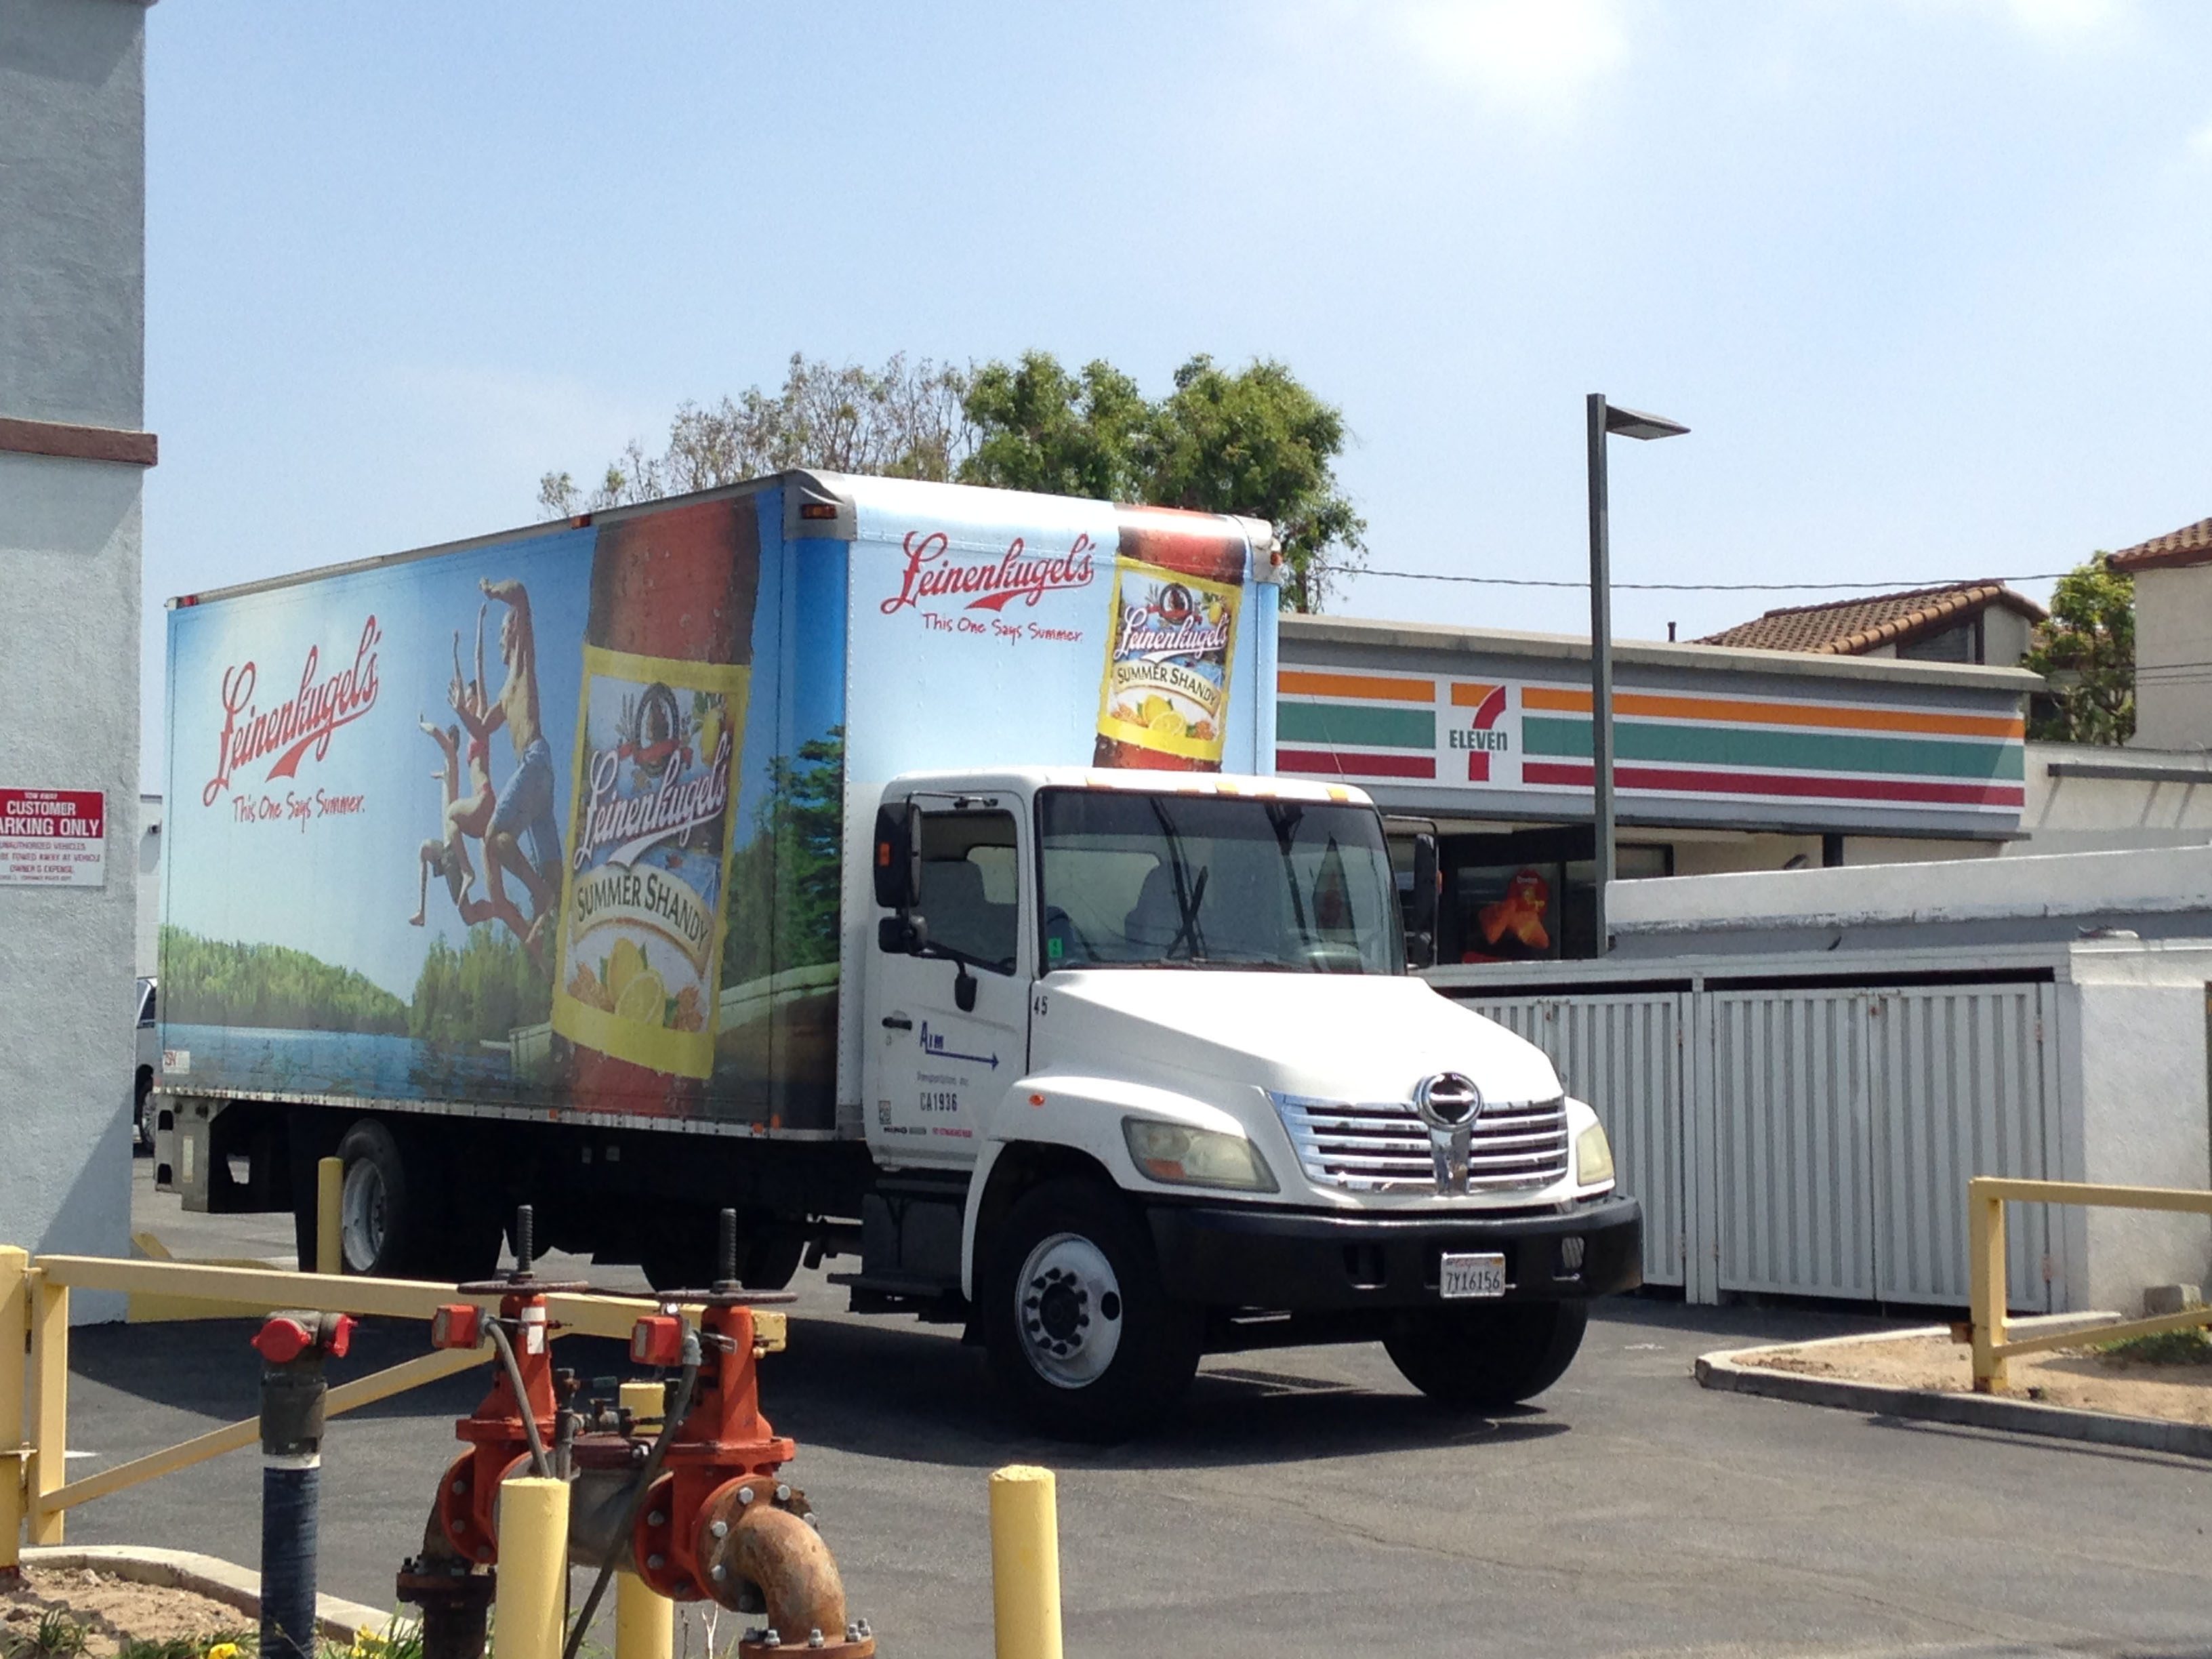 A TSN truck promoting Leinenkugel's Summer Shandy making deliveries in Los Angeles